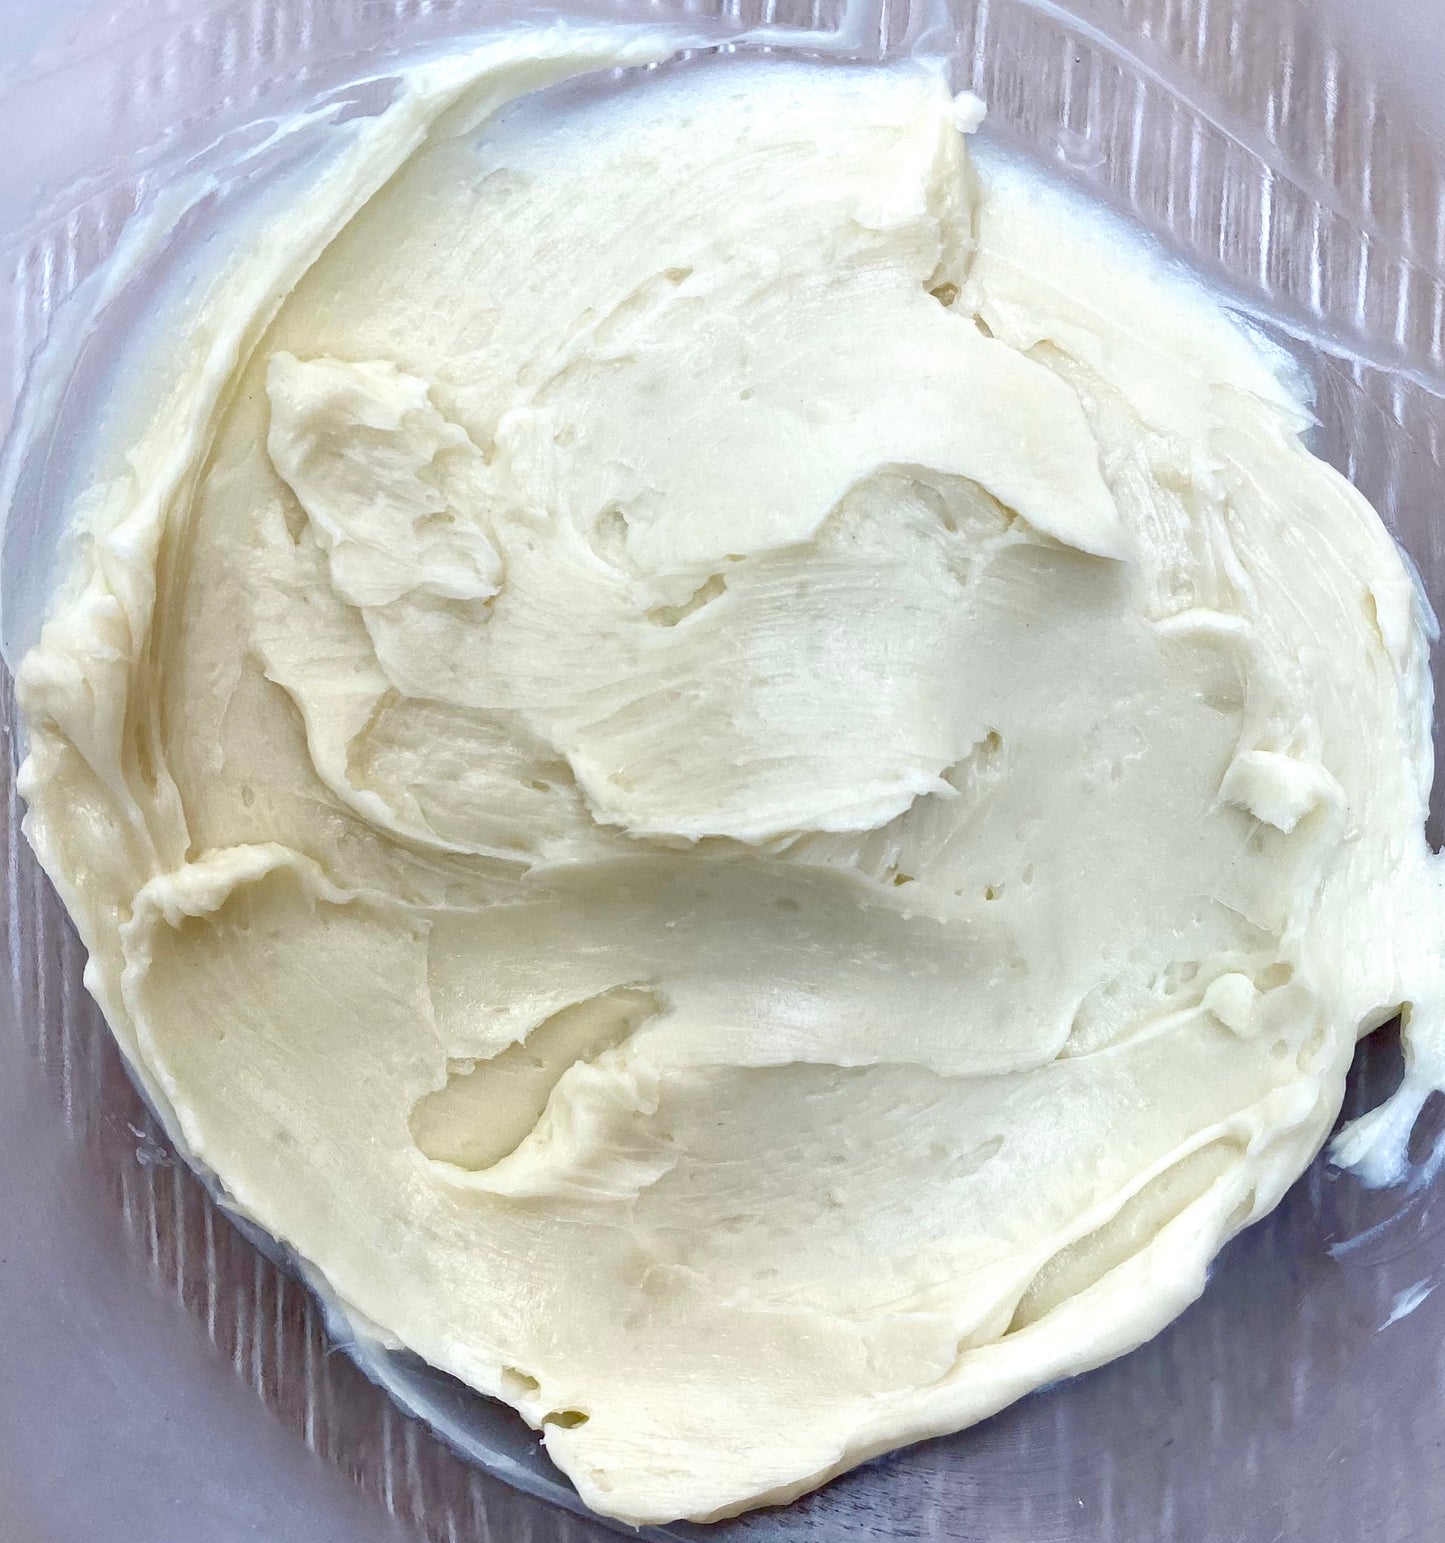 RESTORE Rich Whipped Body Butter